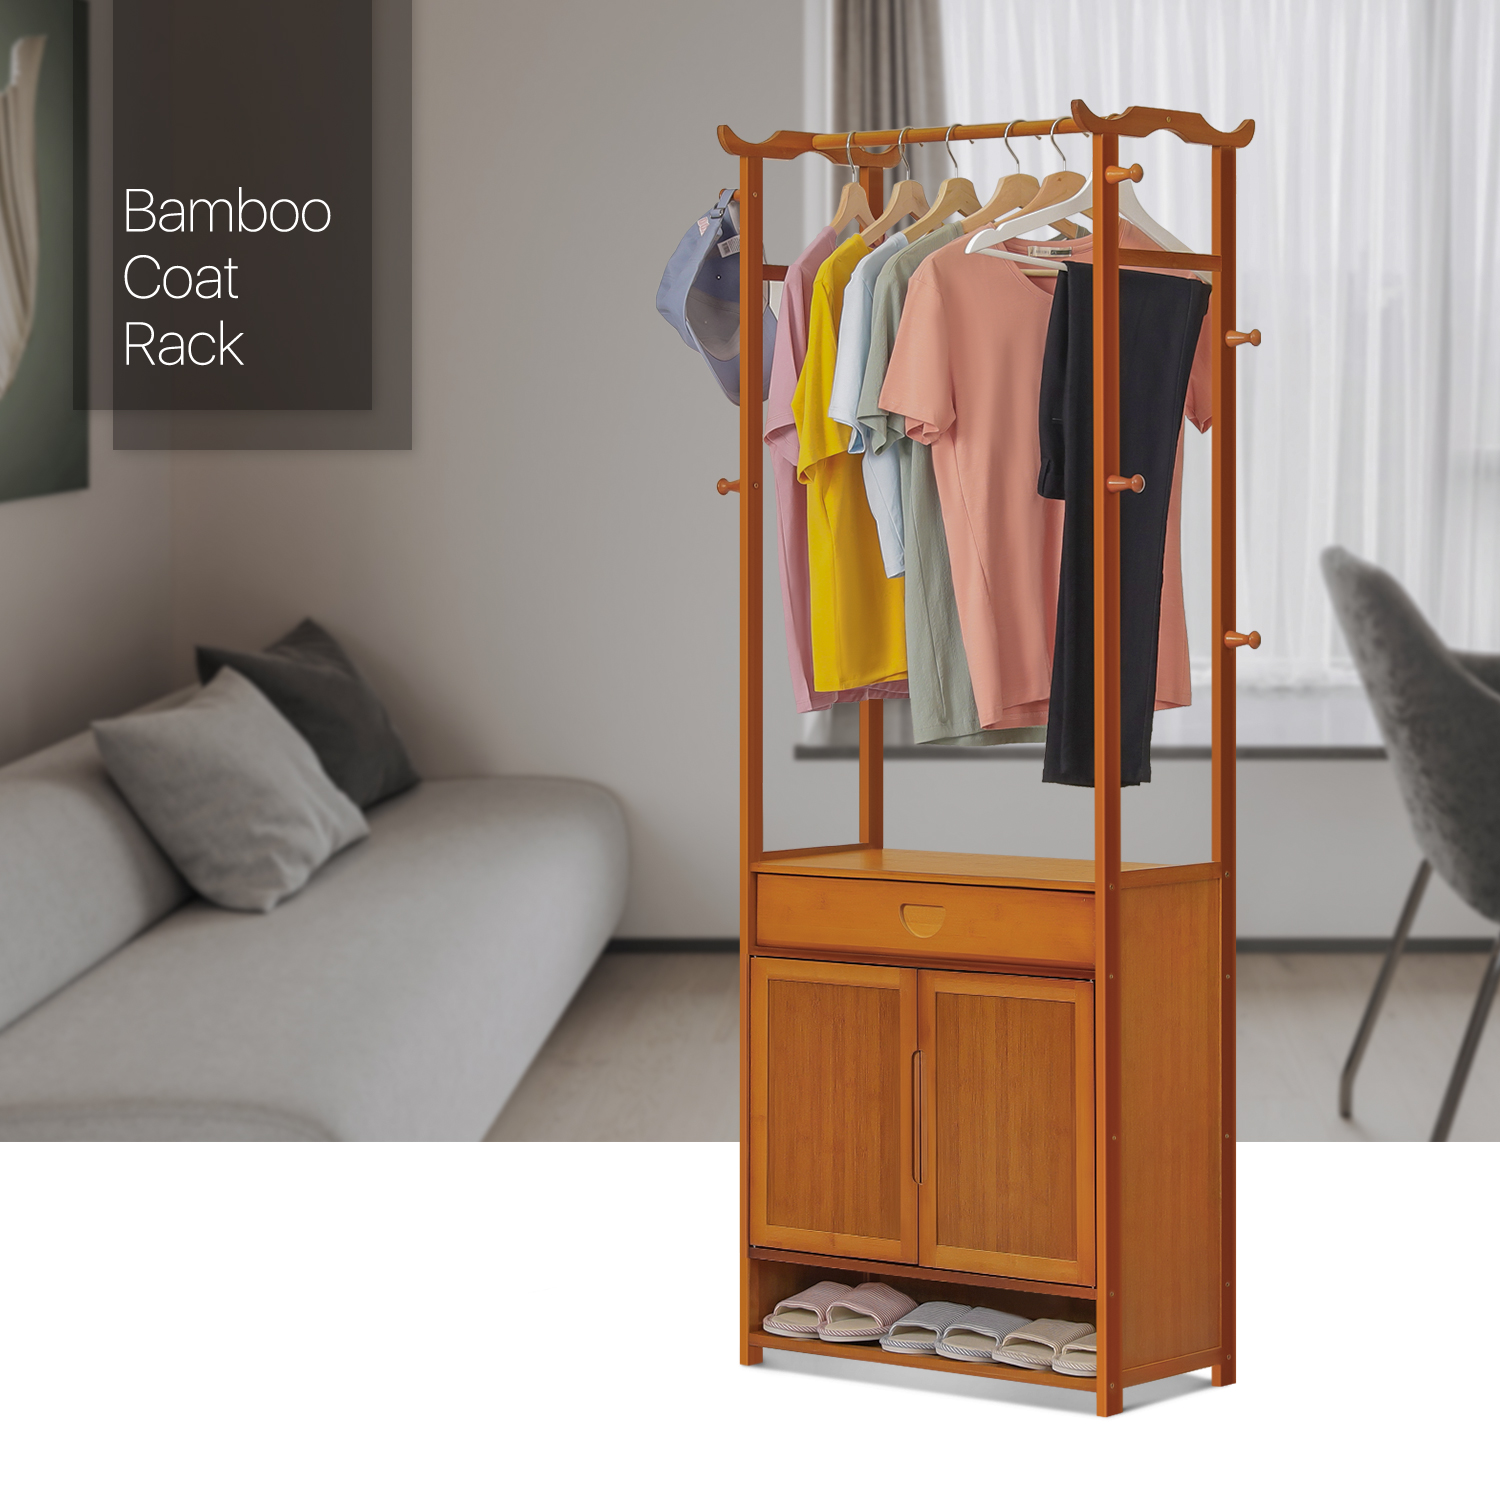 Garment Hanging Stand Rack - Double Door - with Shoes Storage & Drawer